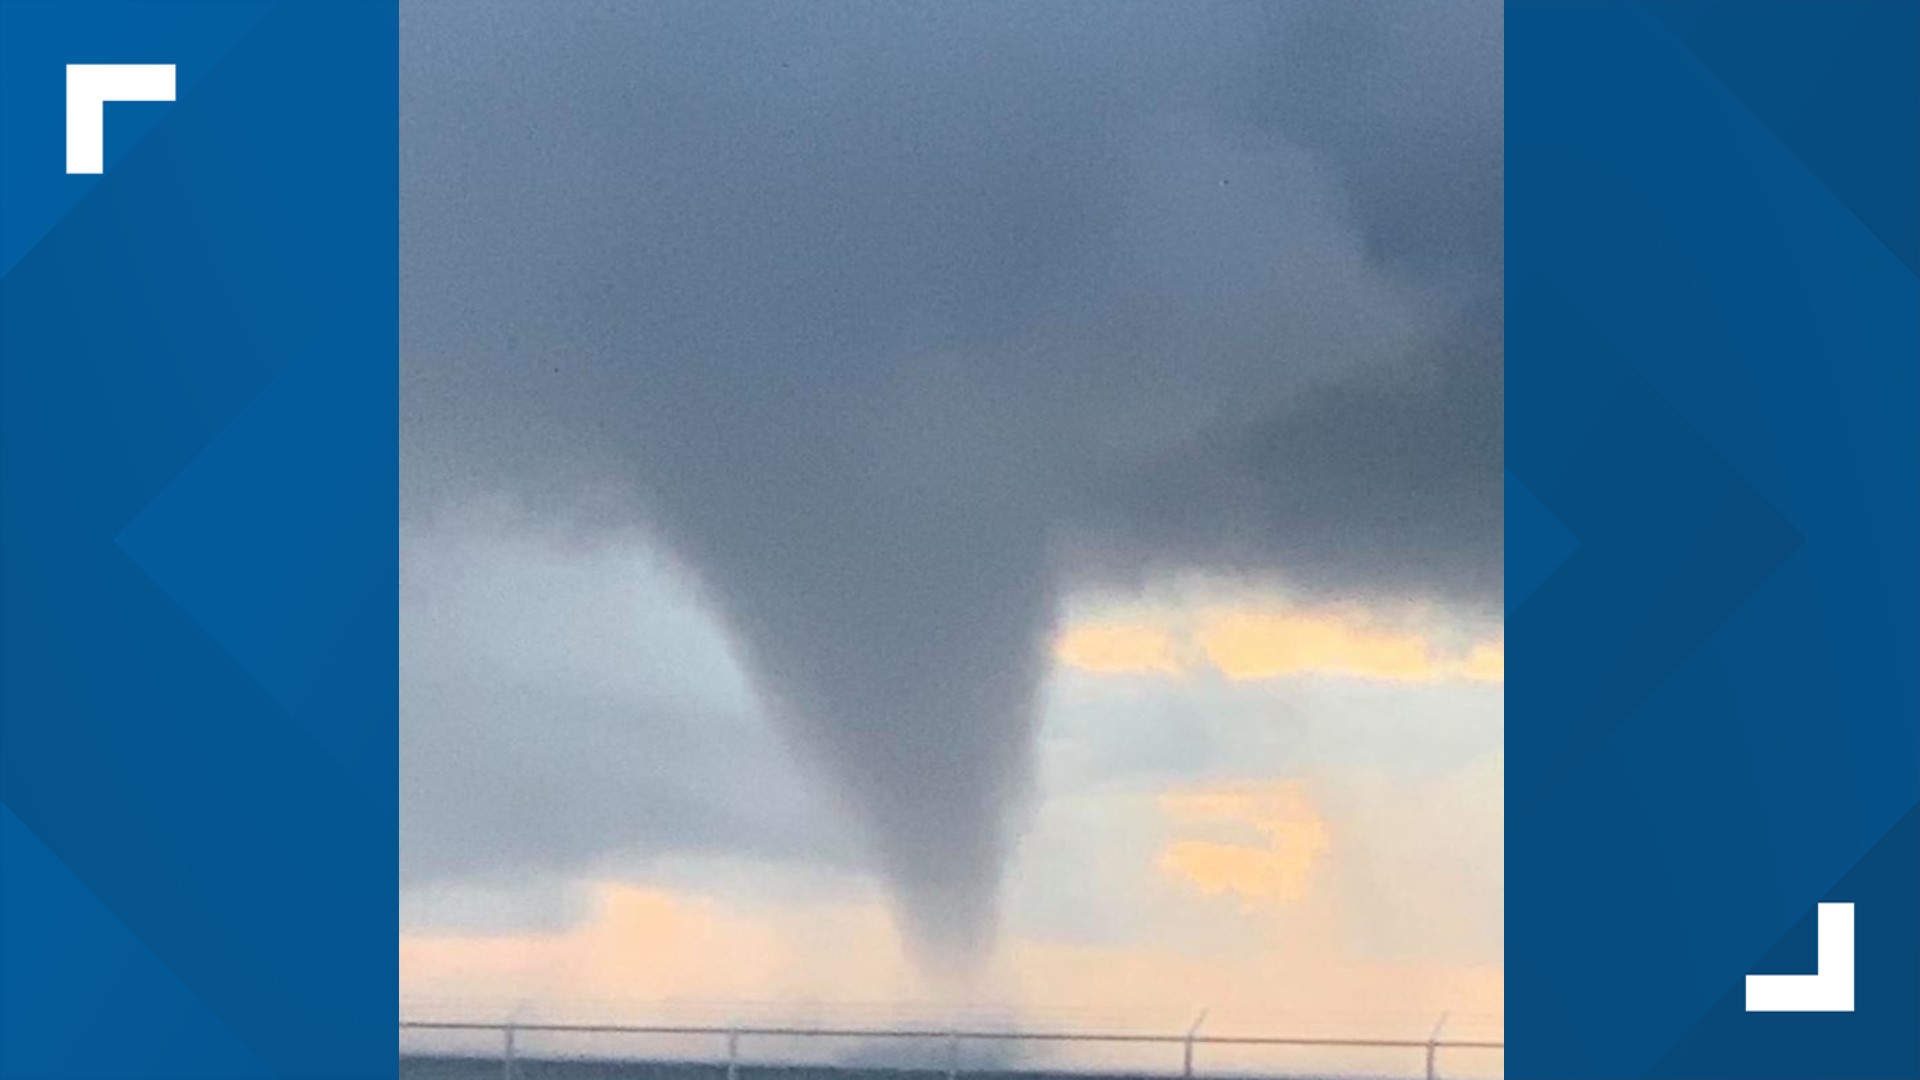 More commonly known as waterspouts, the funnel-shaped vortexes can look eerie. One was even spotted in Maryland.